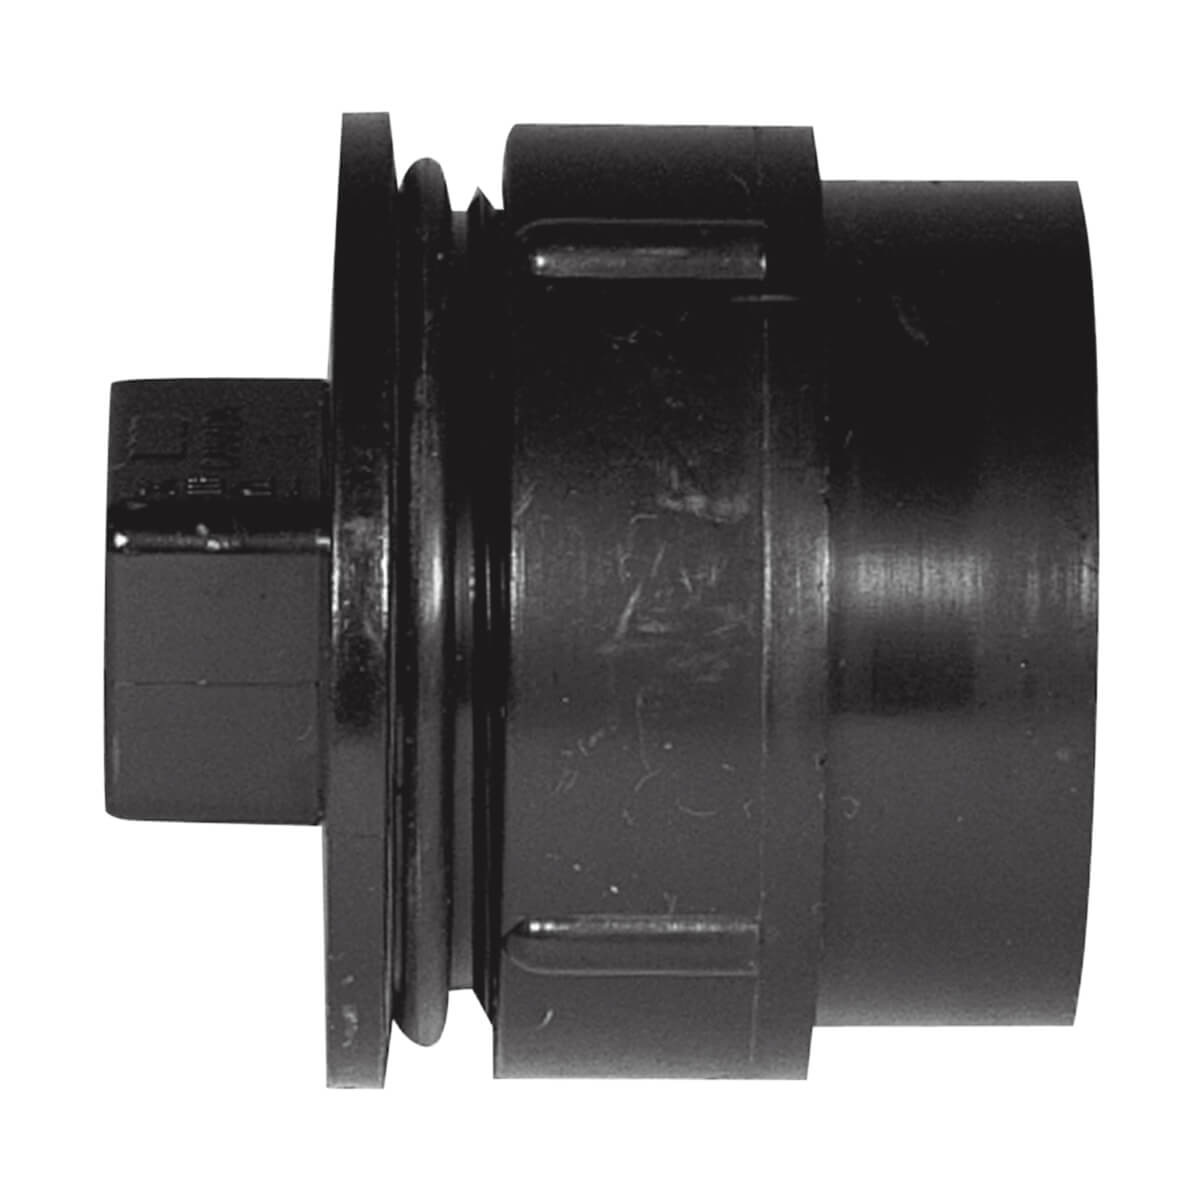 ABS-DWV Cleanout Adapter with plug - Spigot x FPT - 2-in